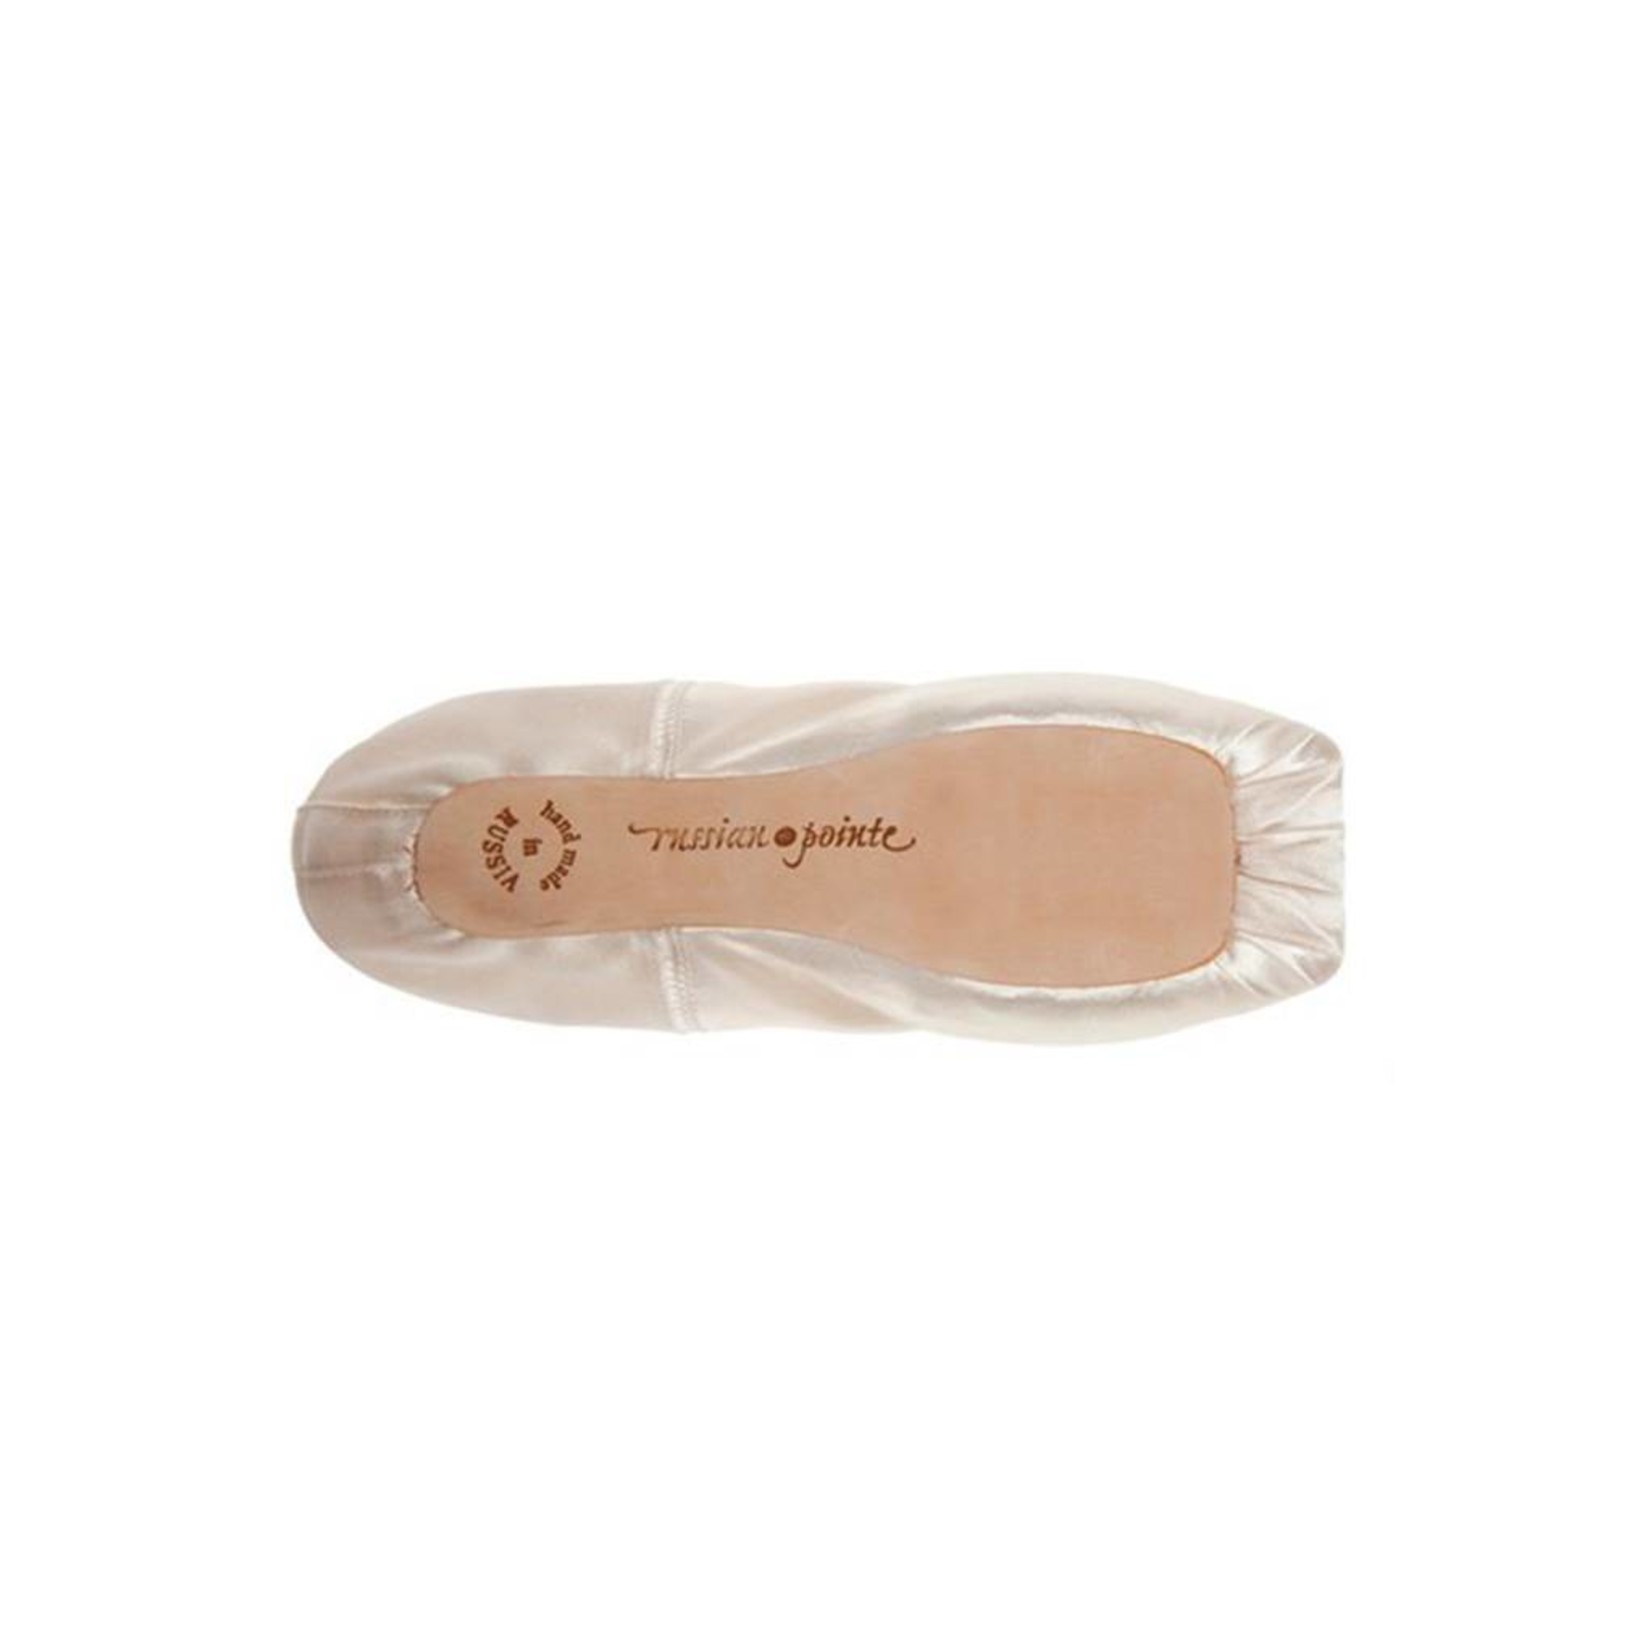 Russian Pointe Size 44: Muse U-Cut Pointe Shoes with Drawstring